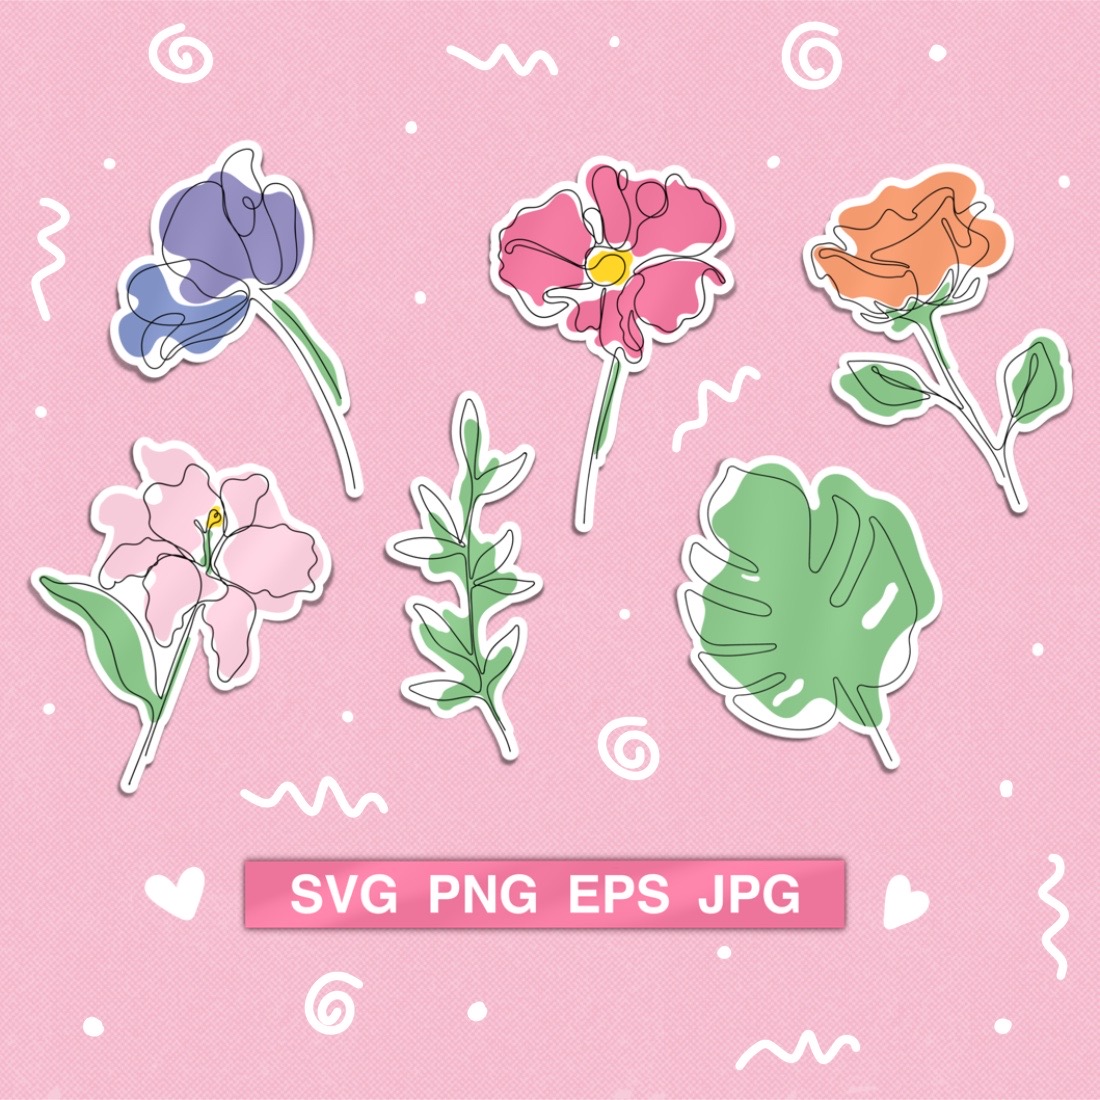 Flowers - One Line Art Clipart Stickers cover image.